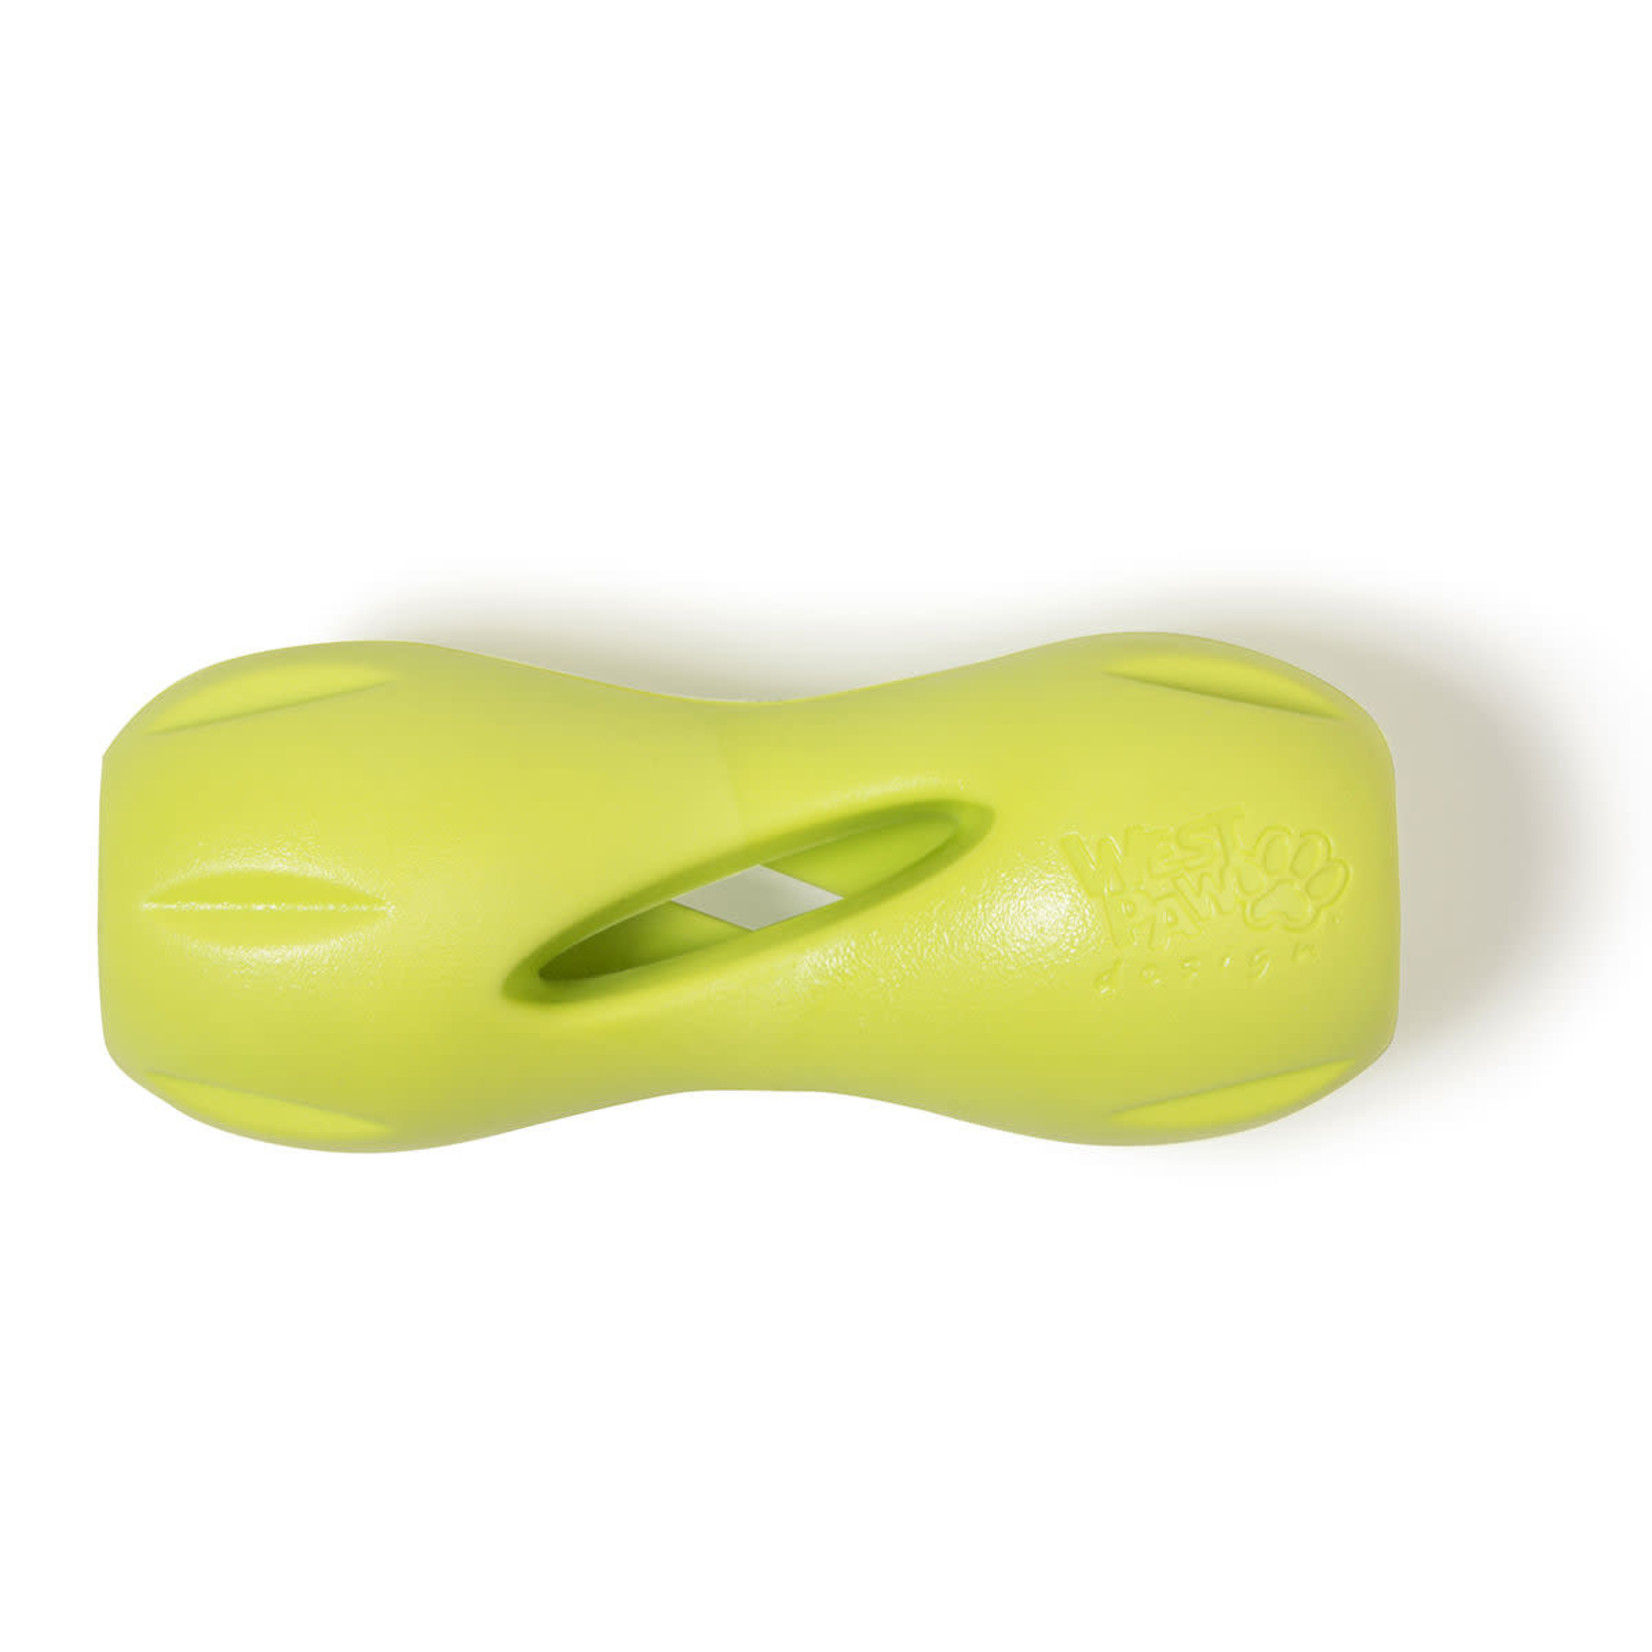 West Paw Qwizl Small 5.5" - green dog toy